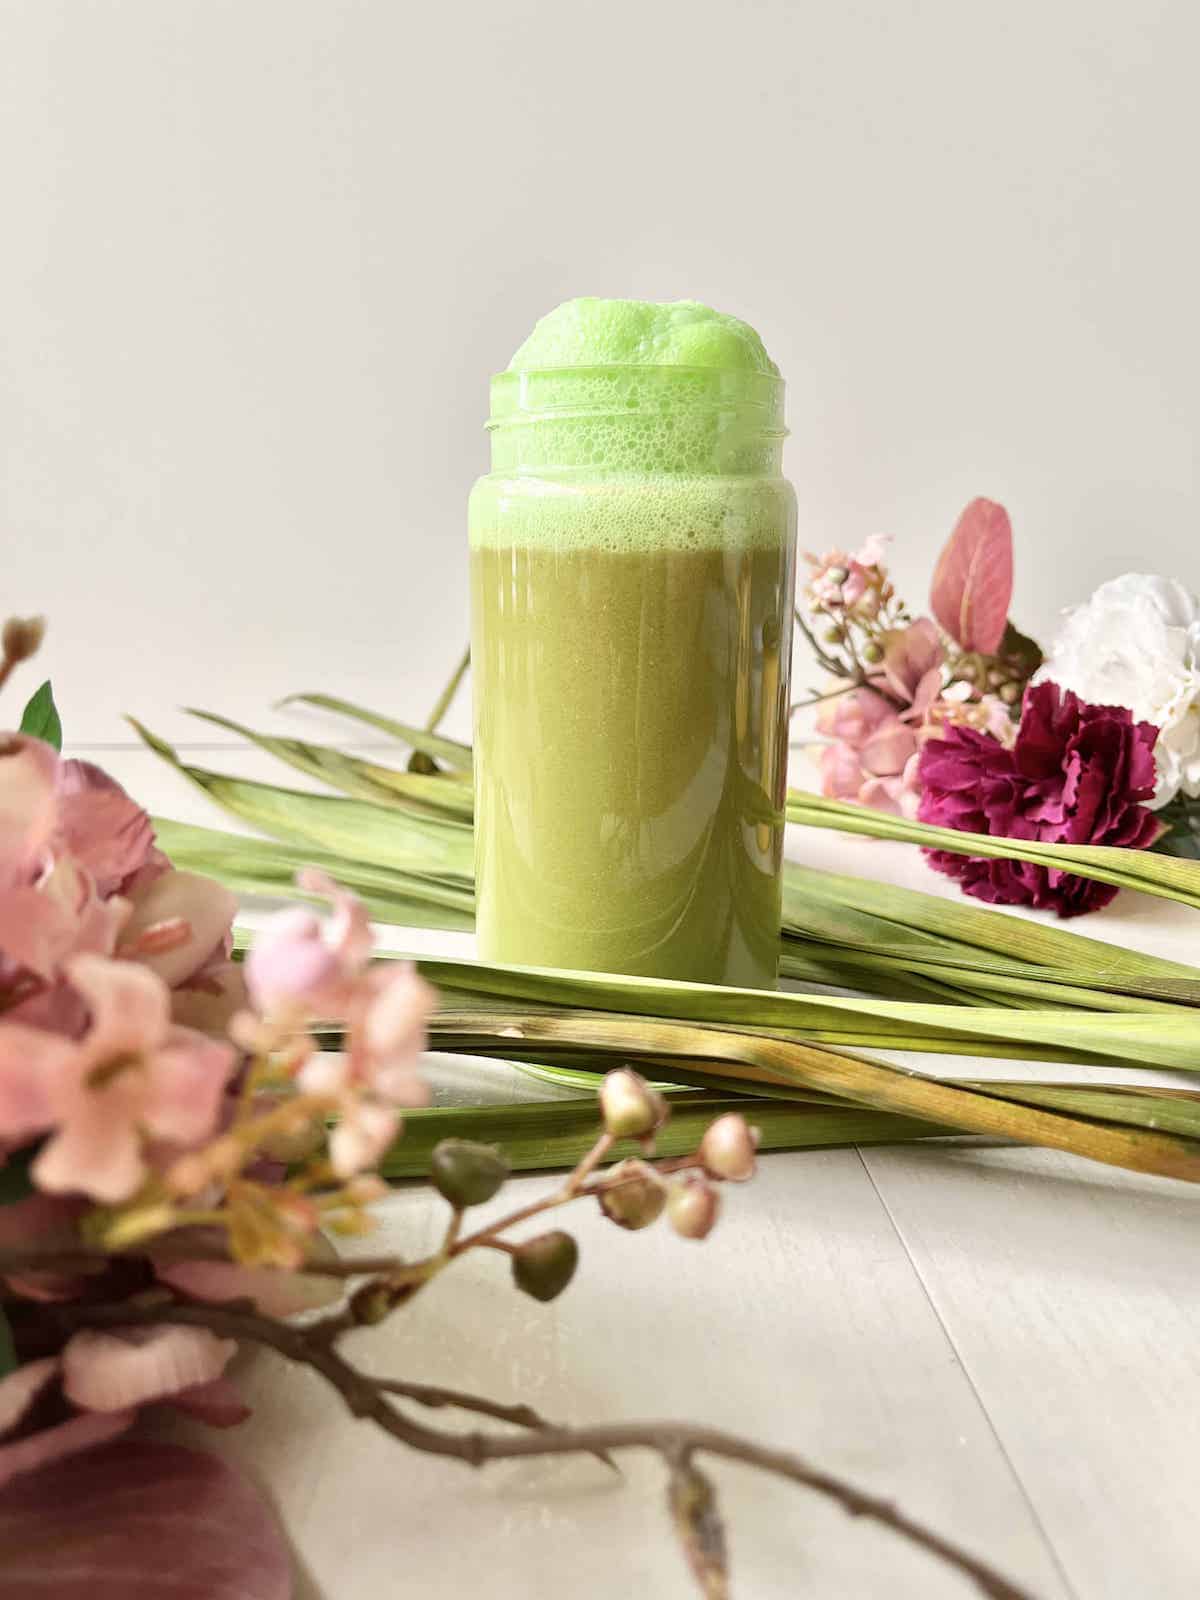 Pandan latte with green foam in container with leaves and flowers in background.